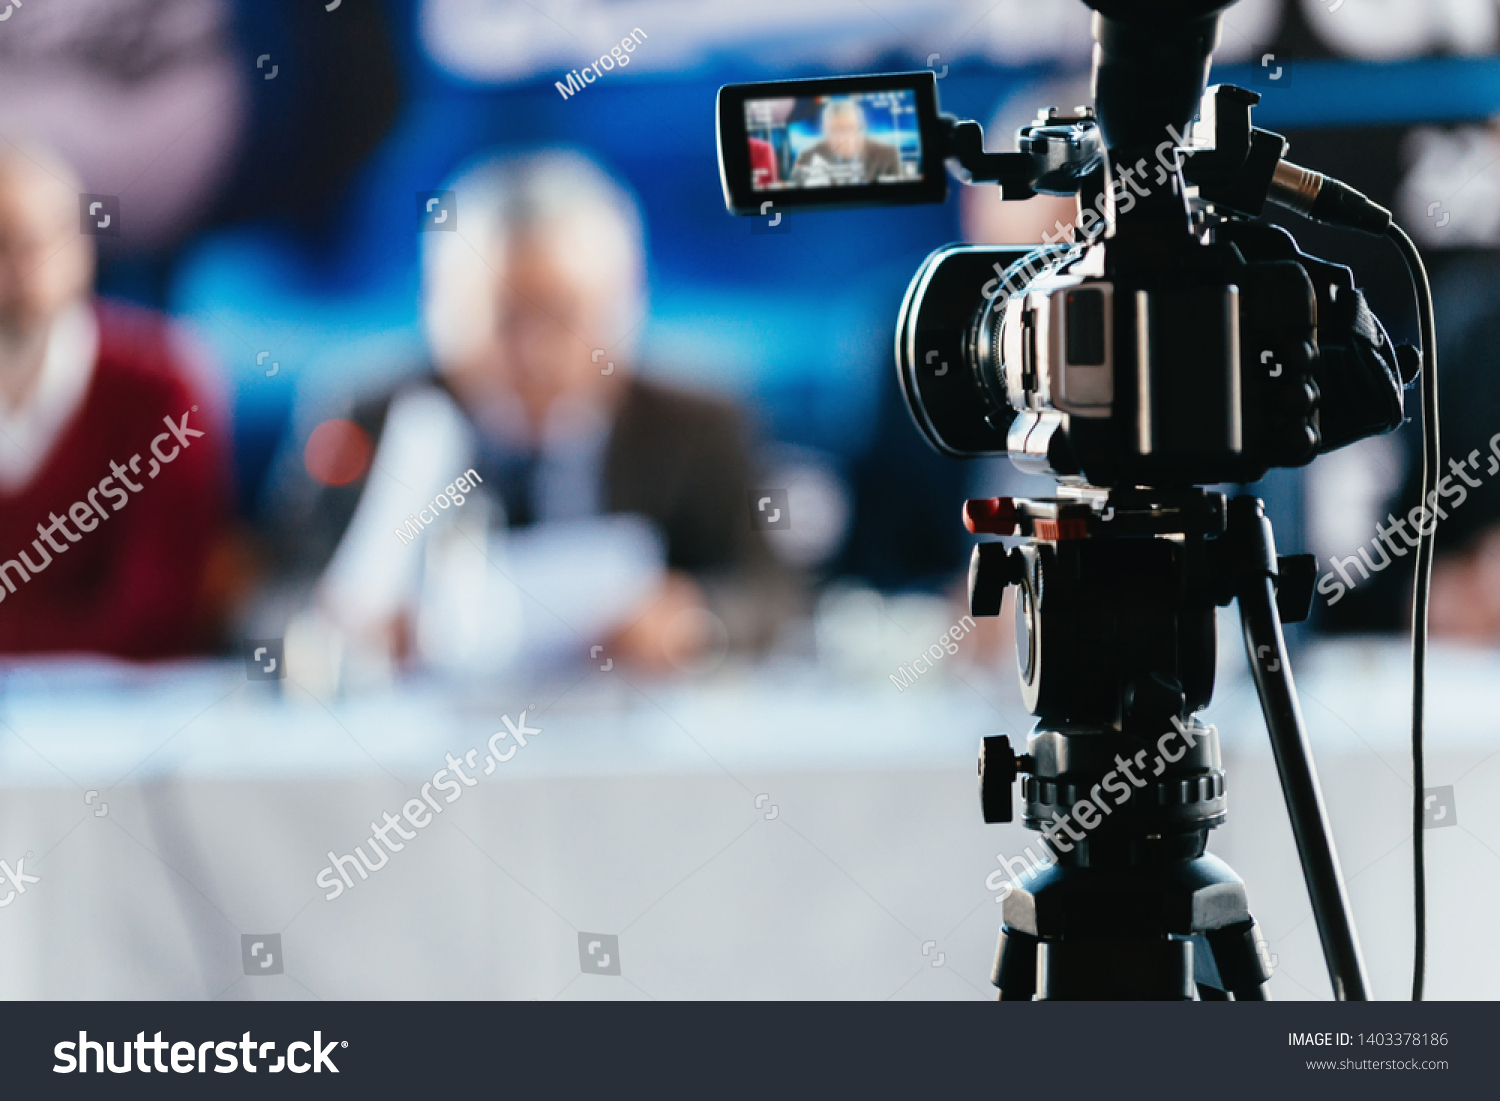 Professional digital camera recording presentation of a blurred speaker wearing suit, live streaming concept #1403378186